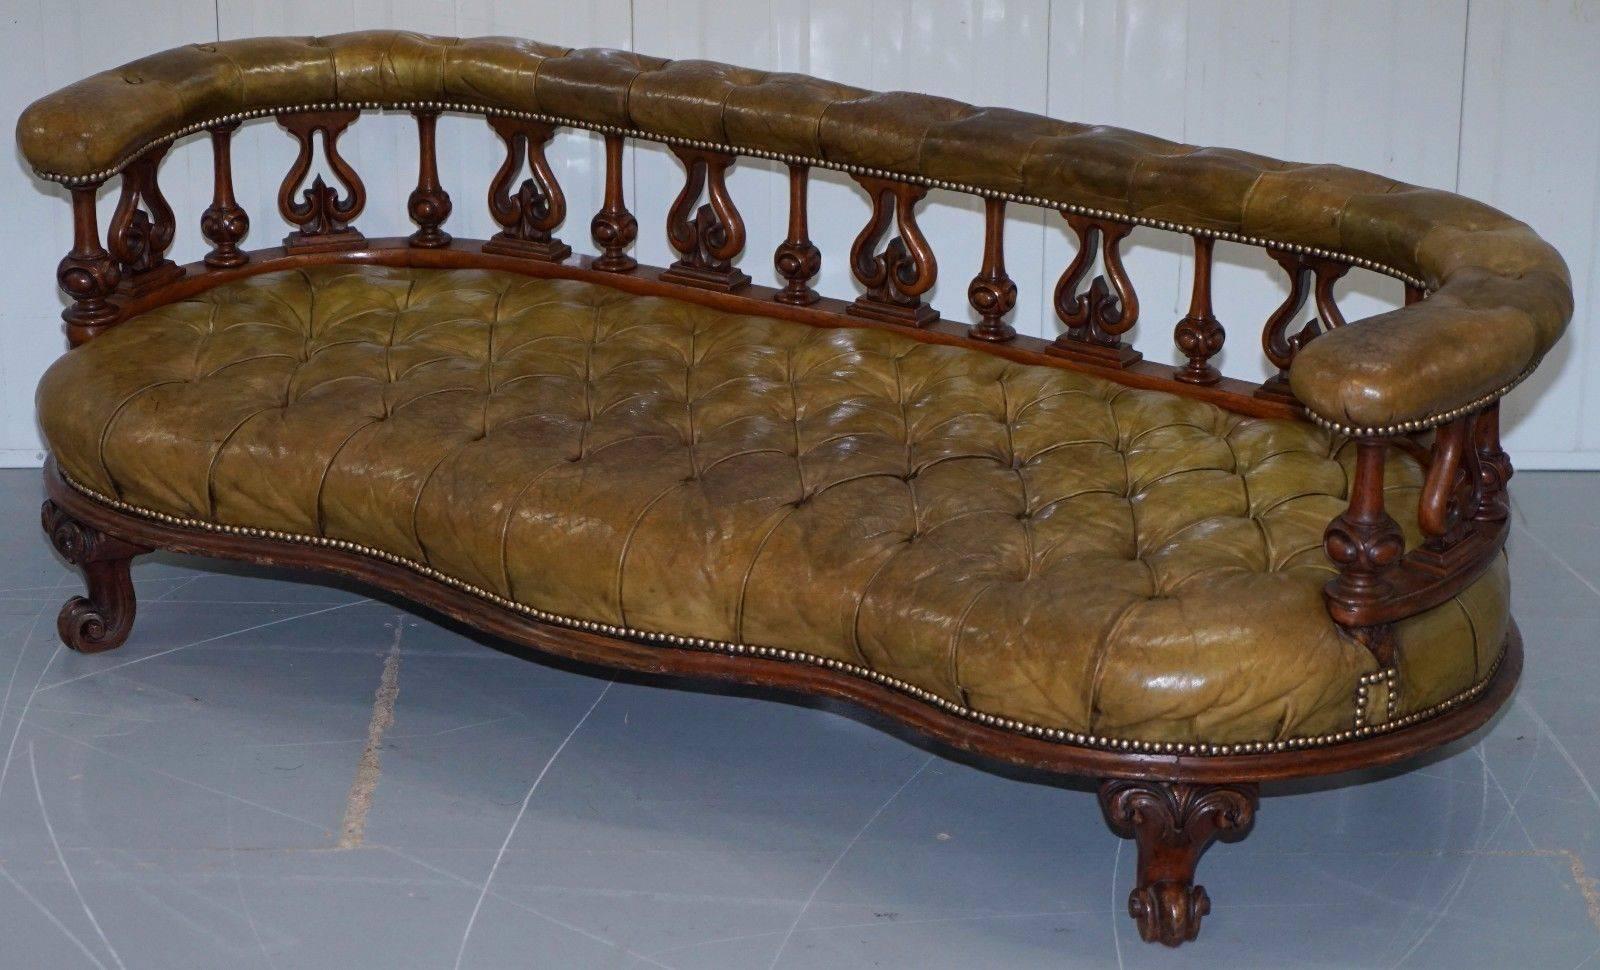 Wimbledon-Furniture

Wimbledon-Furniture is delighted to offer for sale this lovely rare original early Victorian, circa 1840 aged green leather Chesterfield bench sofa

 

This bench settee is one of a kind, handmade in England at the very